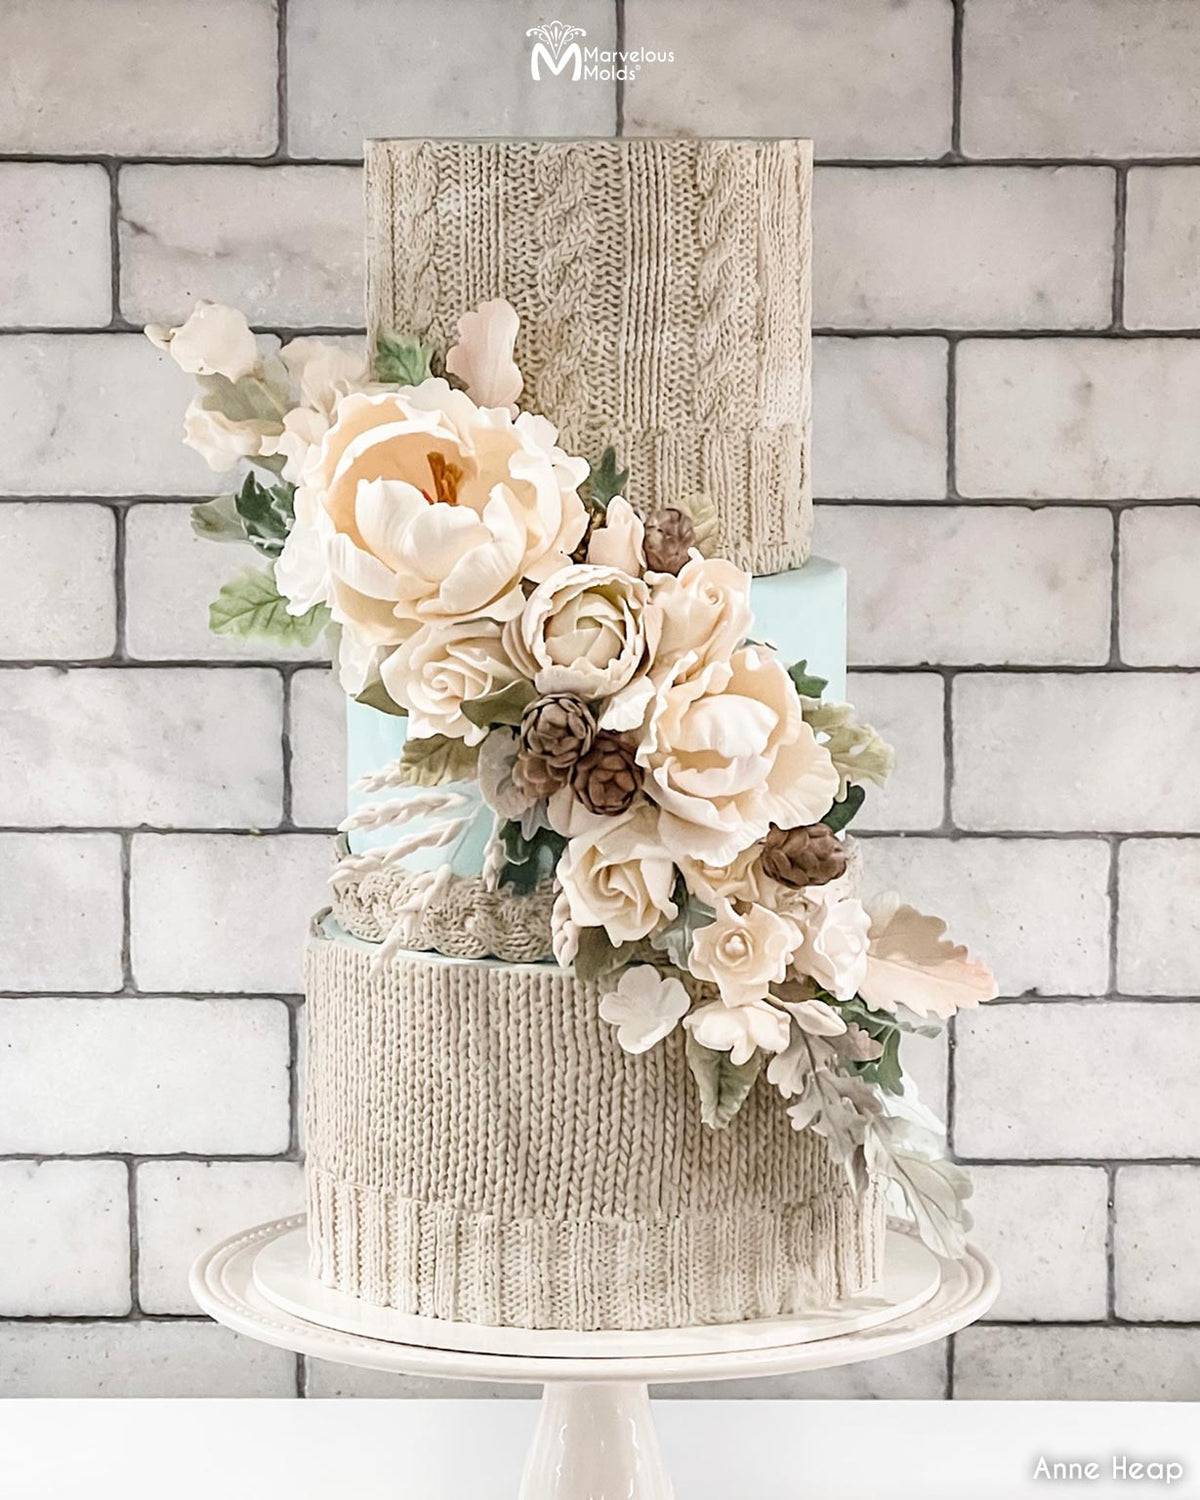 Beige and Cream Knit Wedding Cake, Decorated Using the Marvelous Molds Ribbed Knit Border Silicone Mold for cake decorating